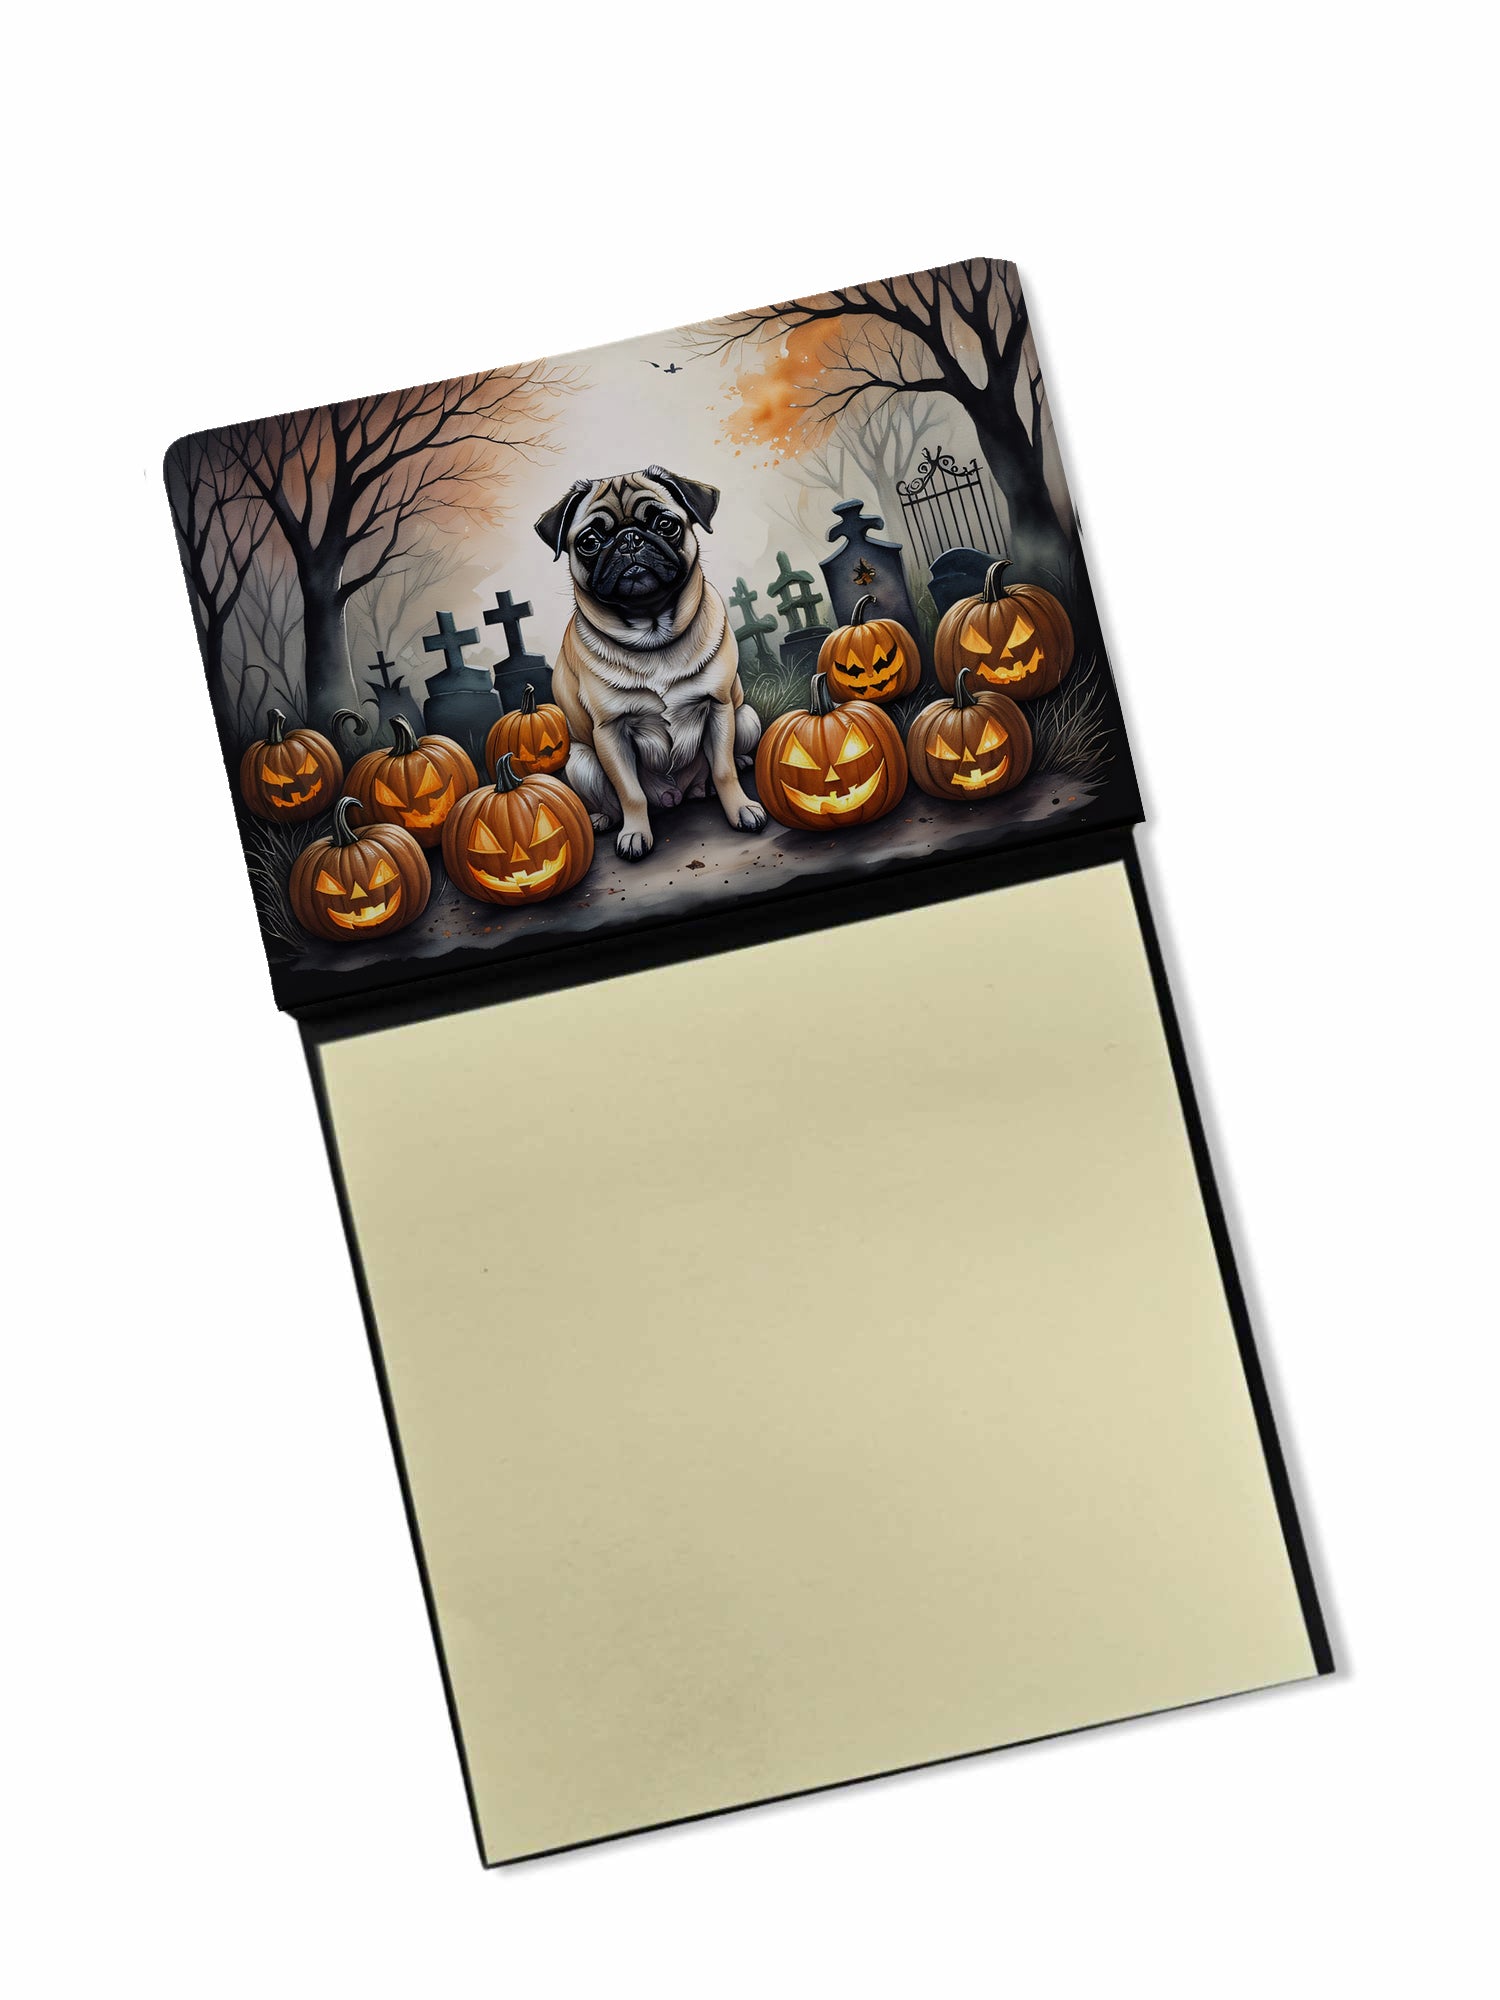 Buy this Fawn Pug Spooky Halloween Sticky Note Holder